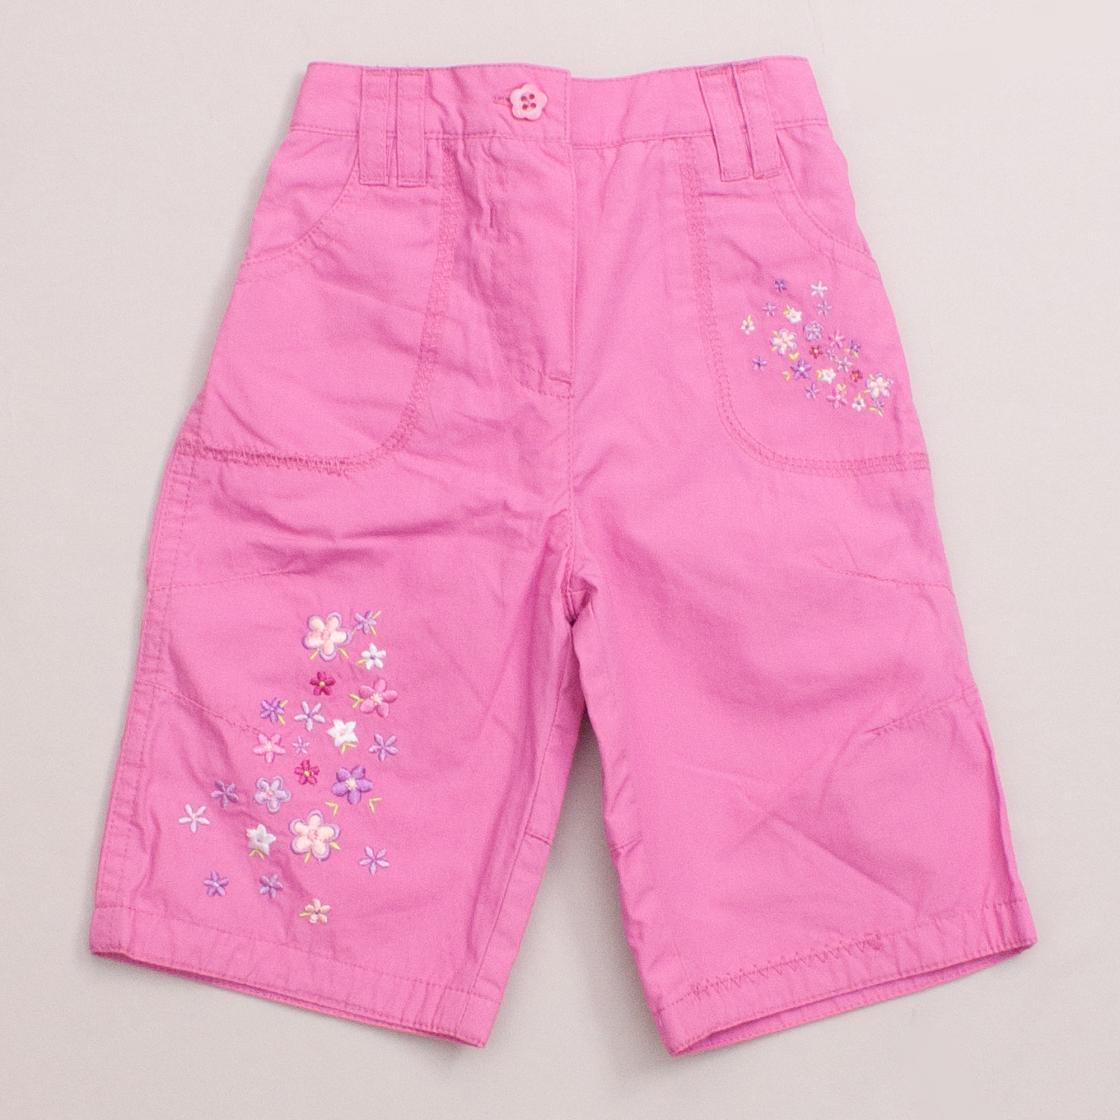 Mothercare Embroidered Pants "Brand New"